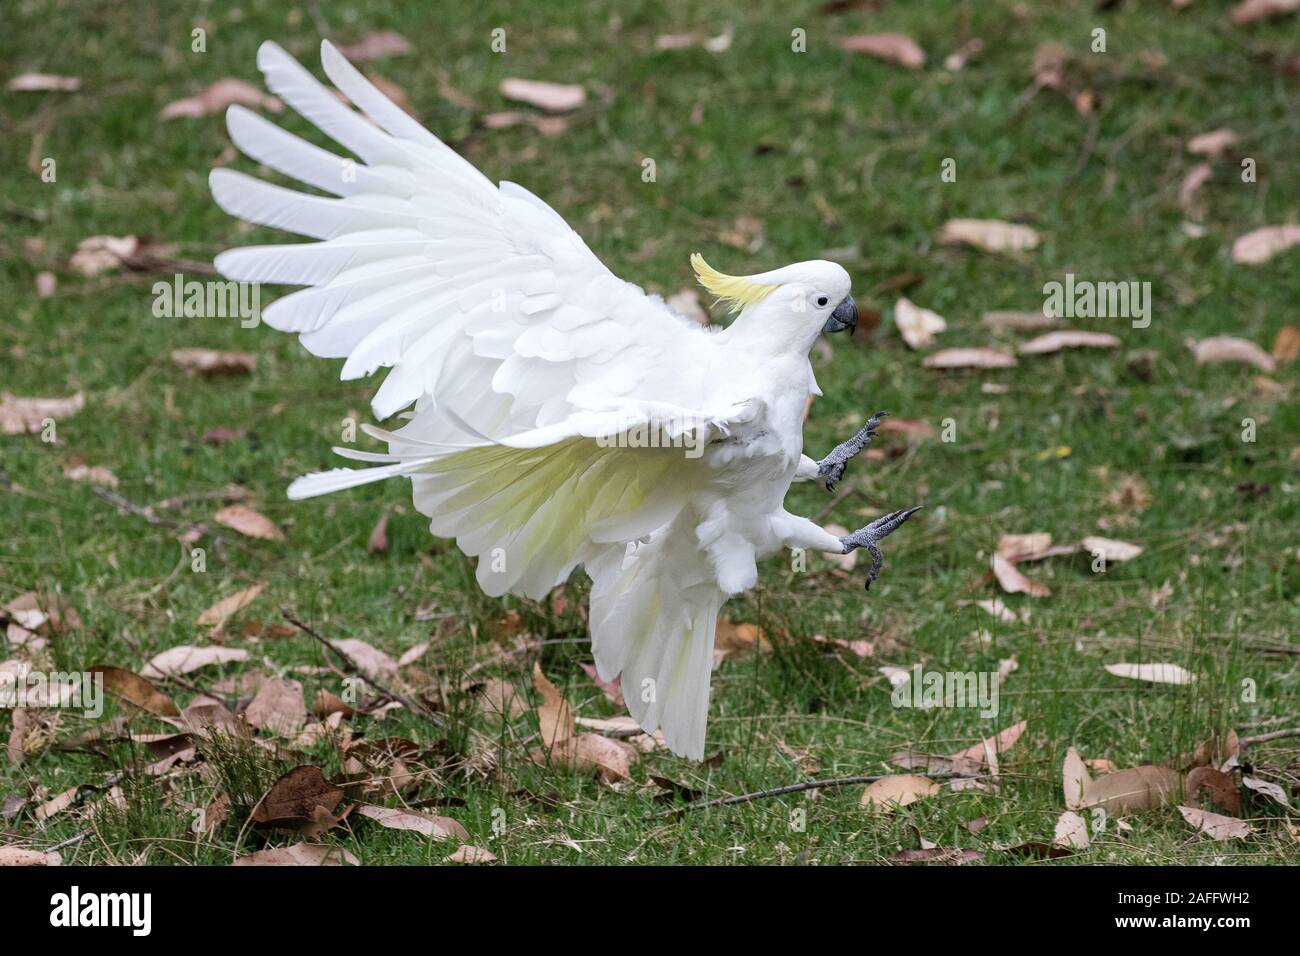 Sulphur-crested Cockatoo about to touch down Stock Photo